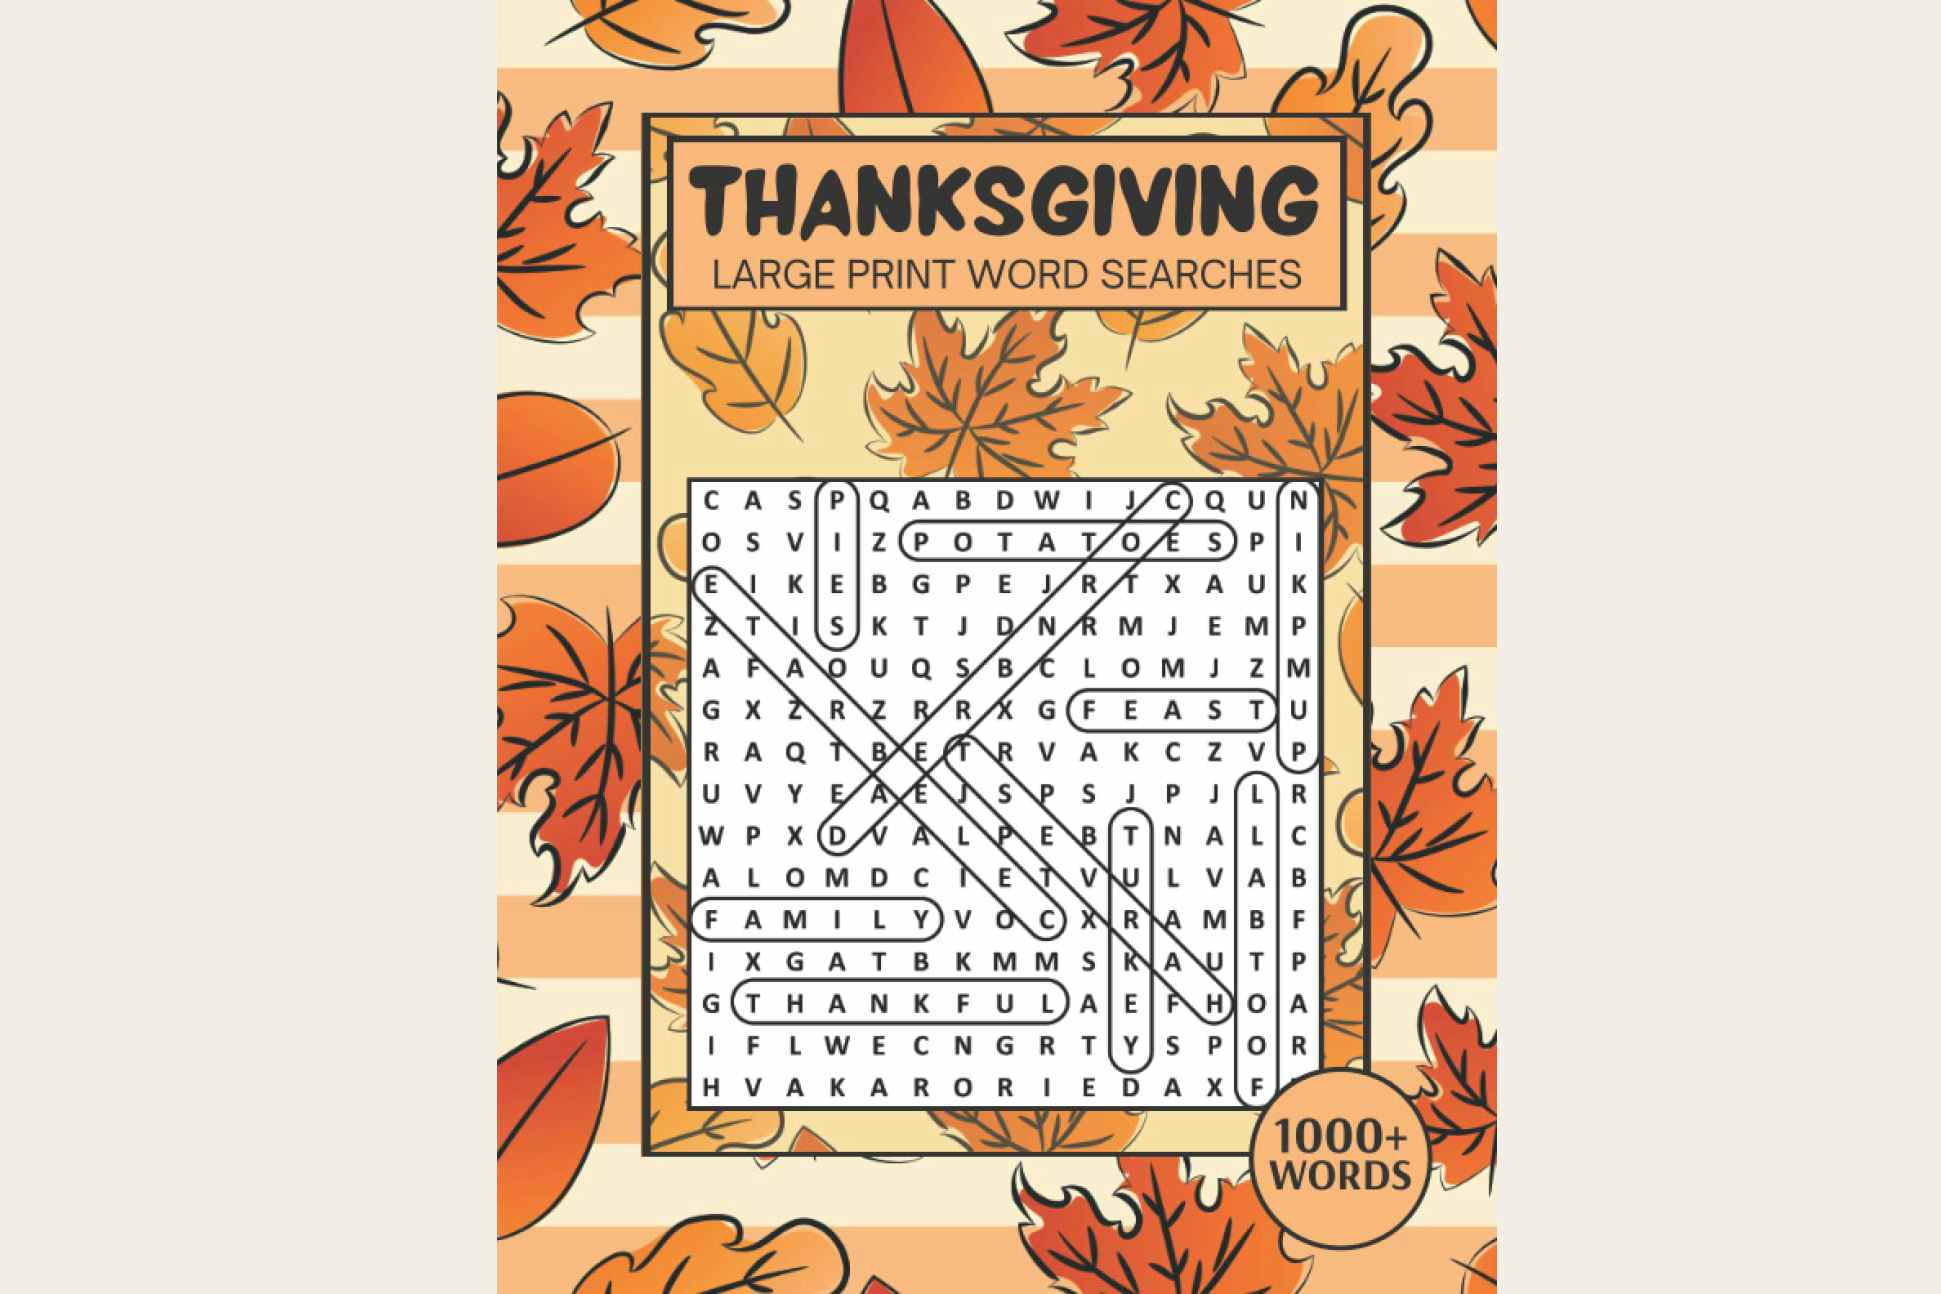 thanksgiving word search